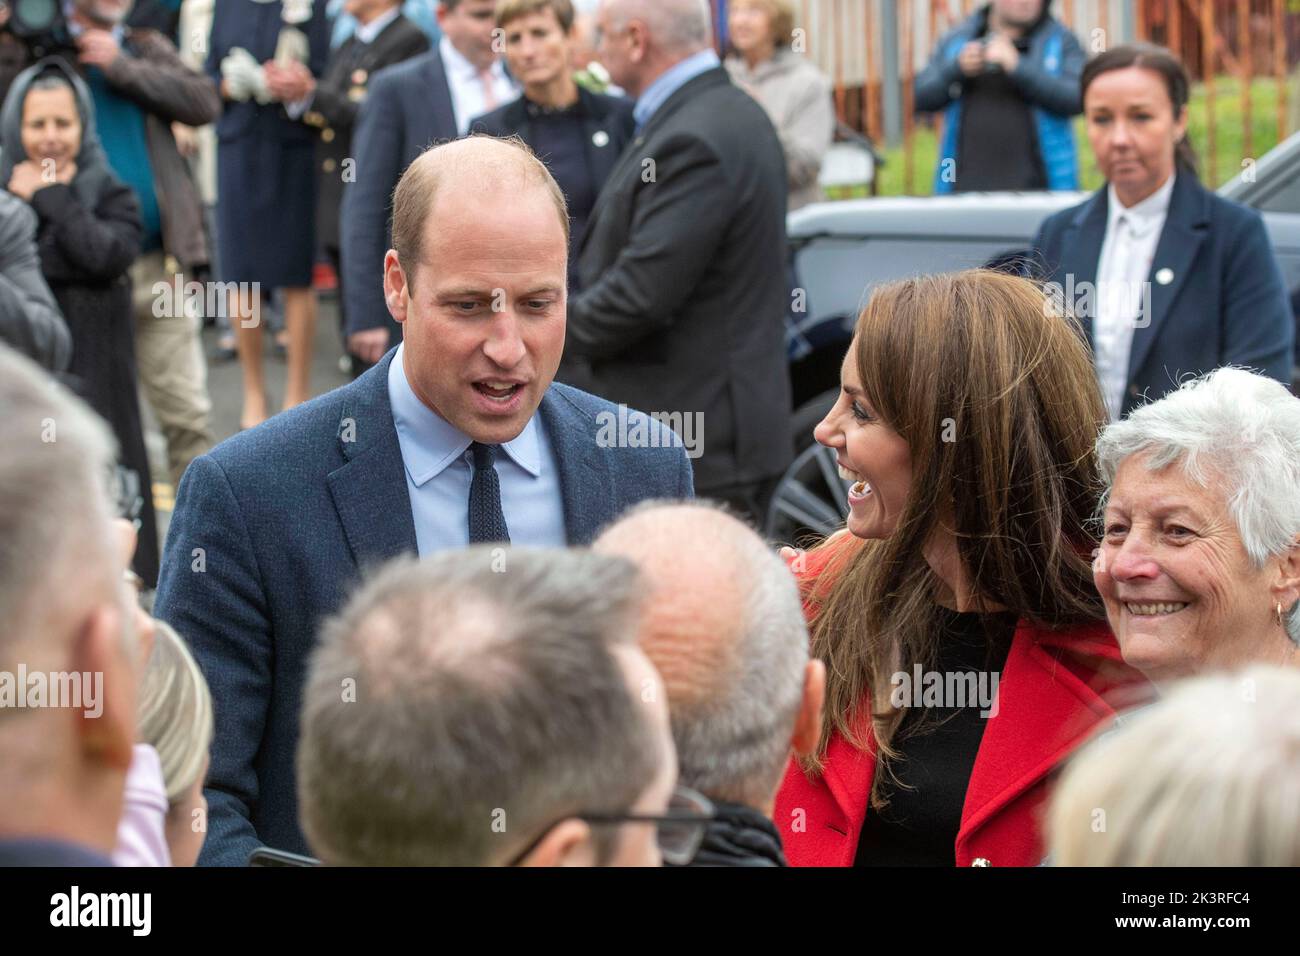 Prince William and Catherine Princess of Wales chatting with local people during their visit to Swansea this afternoon. The royal pair visited St Thomas church in Swansea which supports people in the local area and across Swansea. The church is home to a foodbank that supports over 200 people per week and Swansea Baby Basics, which distribute essential items for vulnerable mothers, such as toiletries and clothes. Stock Photo